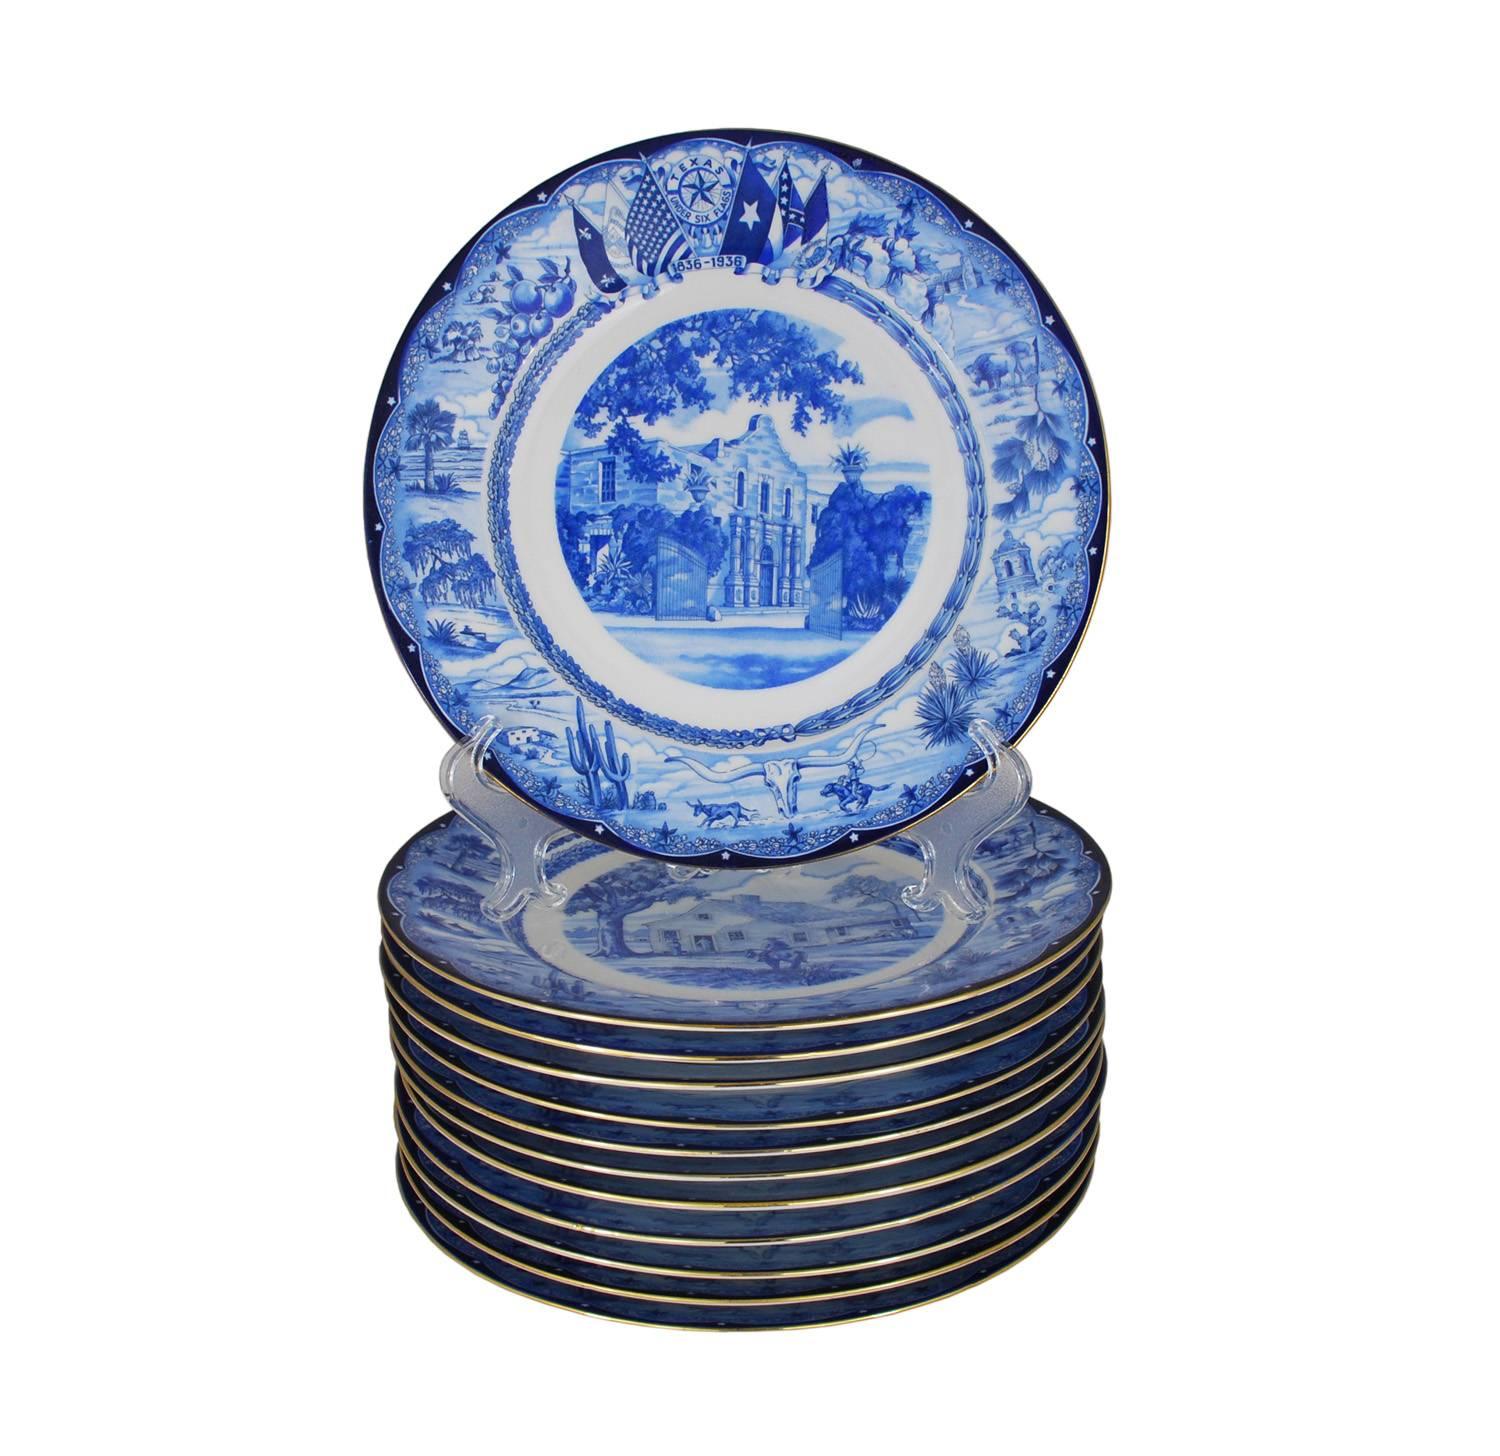 An amazing rare, full set of of commemorative porcelain cabinet plates from the 1936 Texas Centennial Celebration.

Vivid blue high quality transfer on white ground with 14-karat gold edge trim. Each plate features a different historically